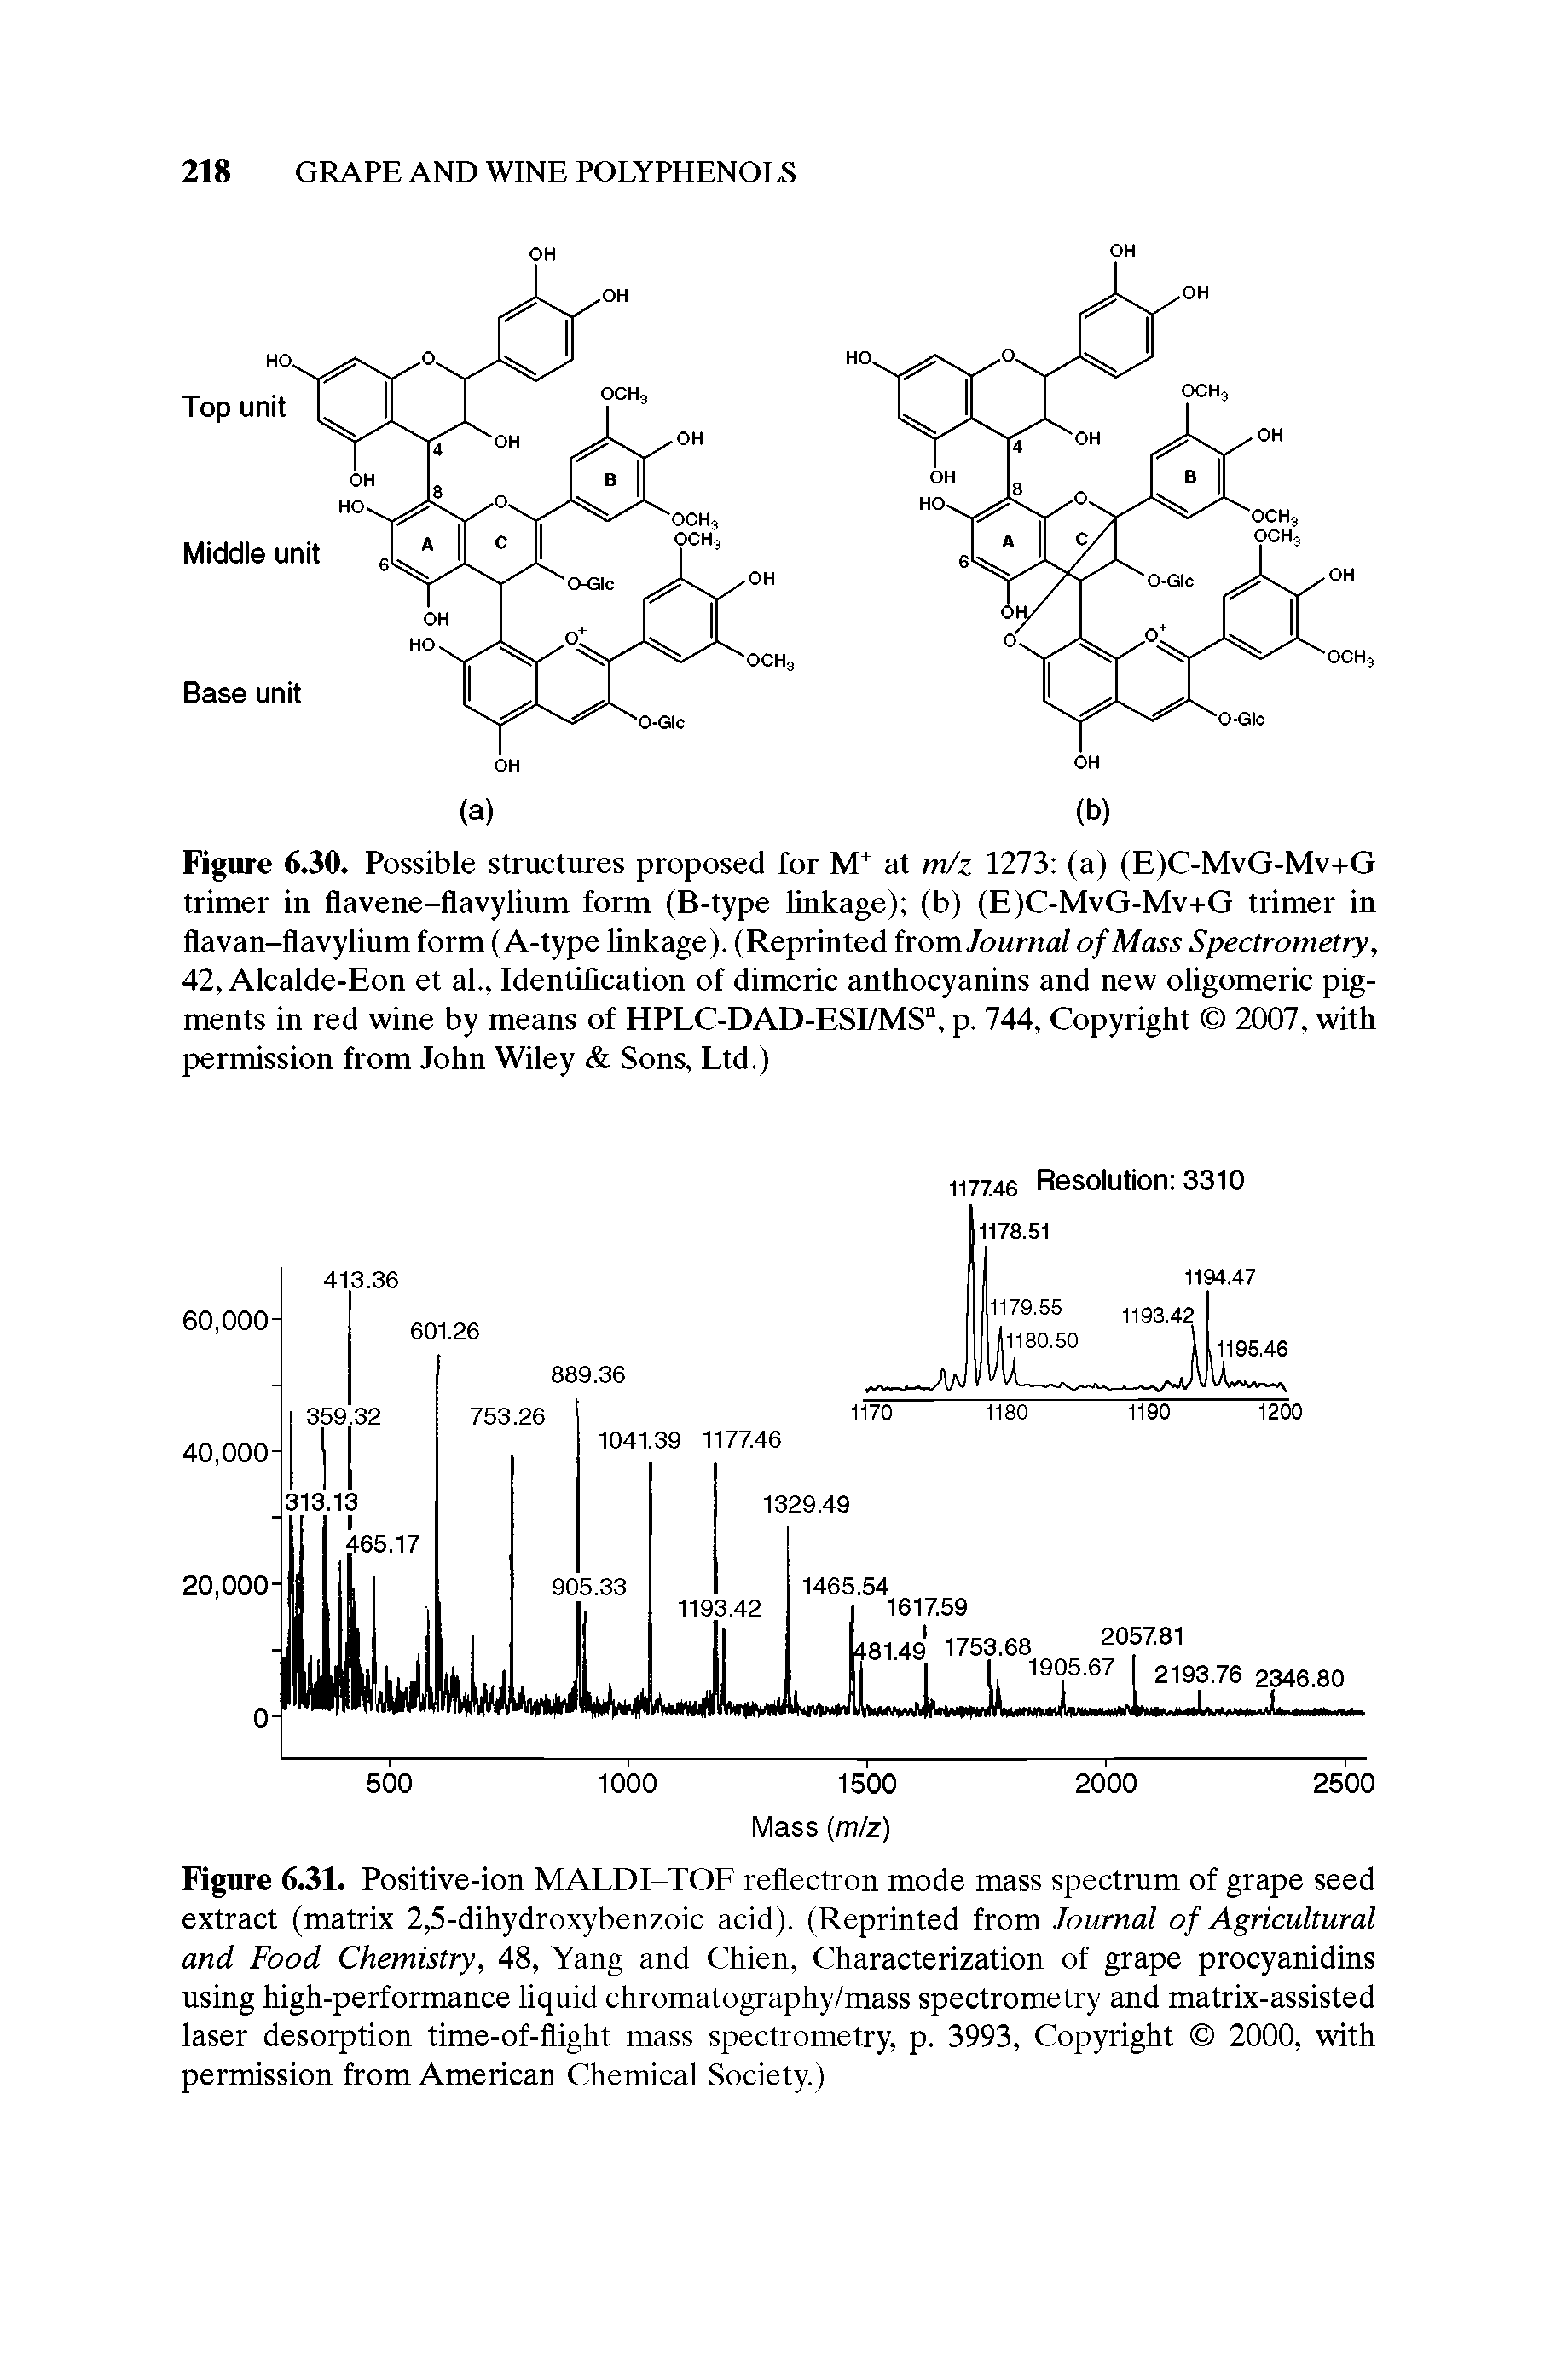 Figure 6.31. Positive-ion MALDI-TOF reflectron mode mass spectrum of grape seed extract (matrix 2,5-dihydroxybenzoic acid). (Reprinted from Journal of Agricultural and Food Chemistry, 48, Yang and Chien, Characterization of grape procyanidins using high-performance liquid chromatography/mass spectrometry and matrix-assisted laser desorption time-of-flight mass spectrometry, p. 3993, Copyright 2000, with permission from American Chemical Society.)...